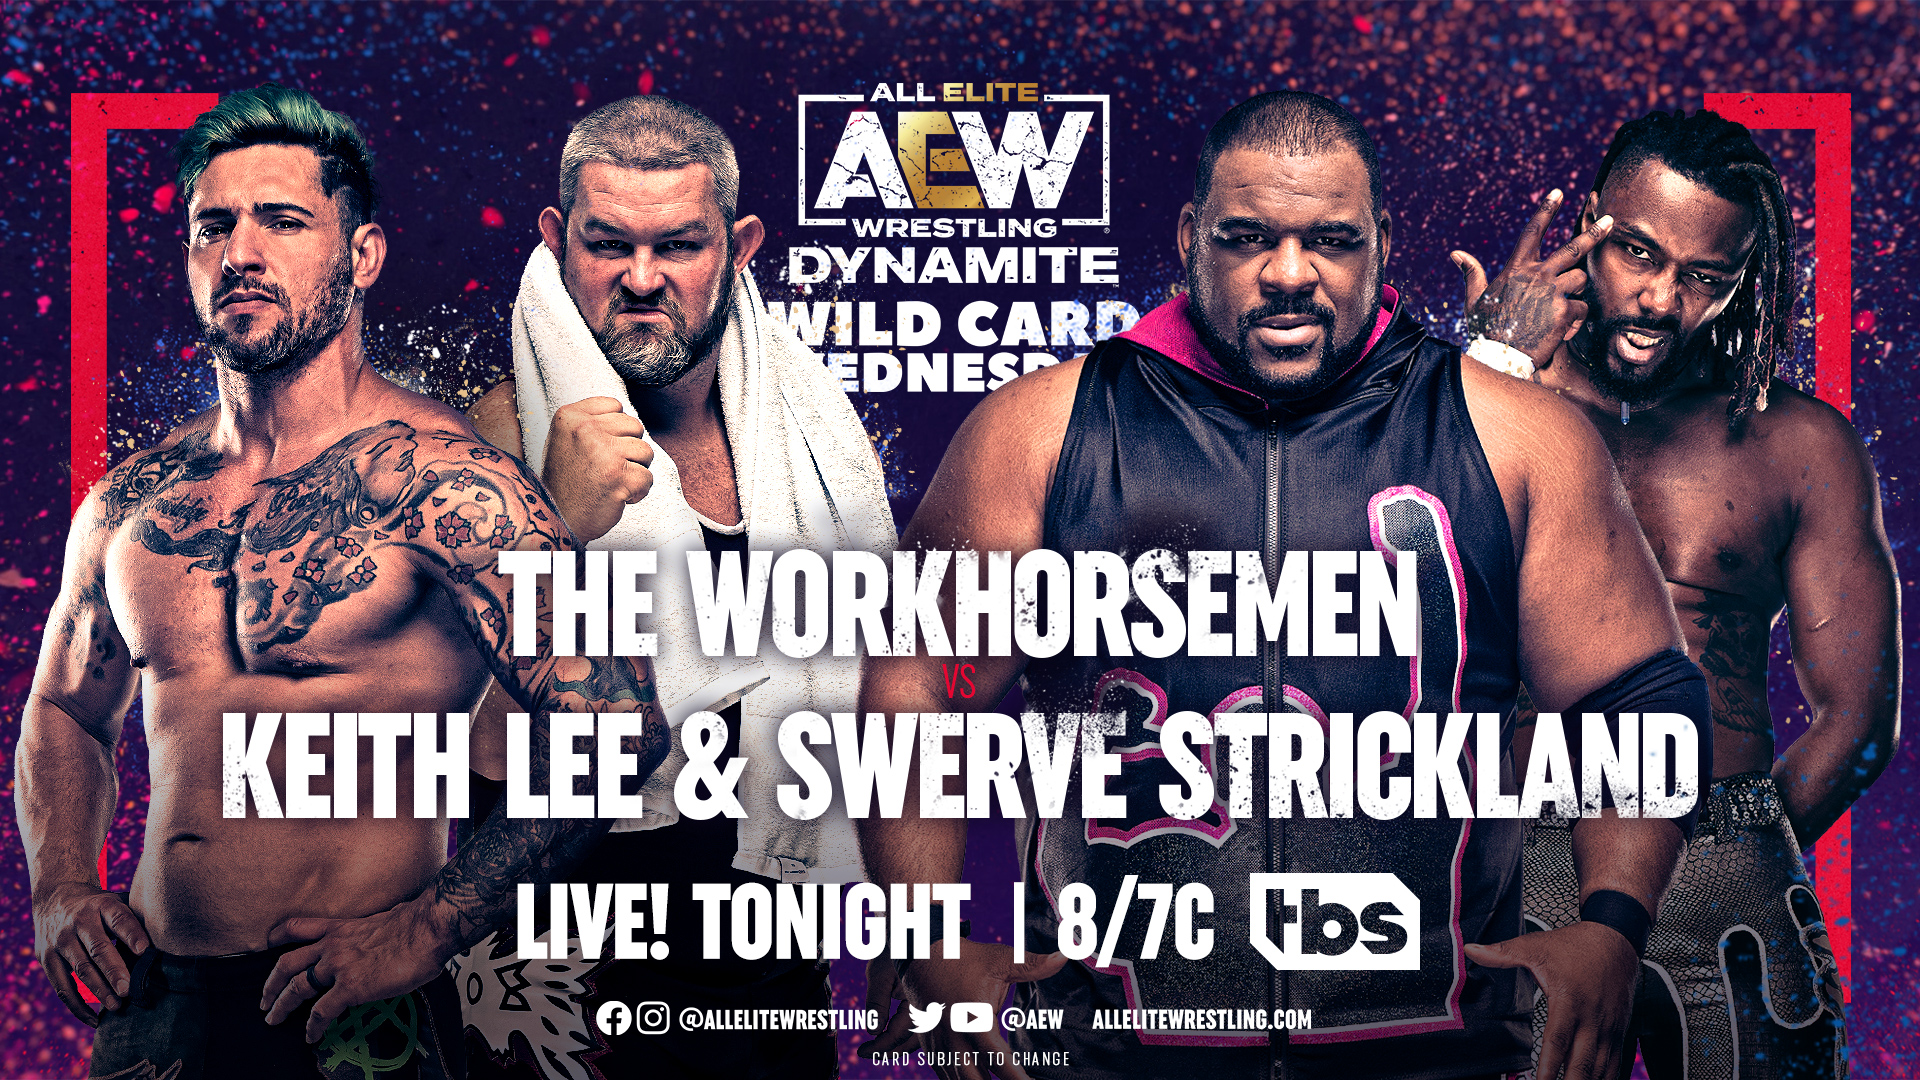 All Elite Wrestling on Twitter: "The team of #Limitless @RealKeithLee & @swerveconfident have been building momentum in the #AEW tag team division and are looking to add another win to their record,